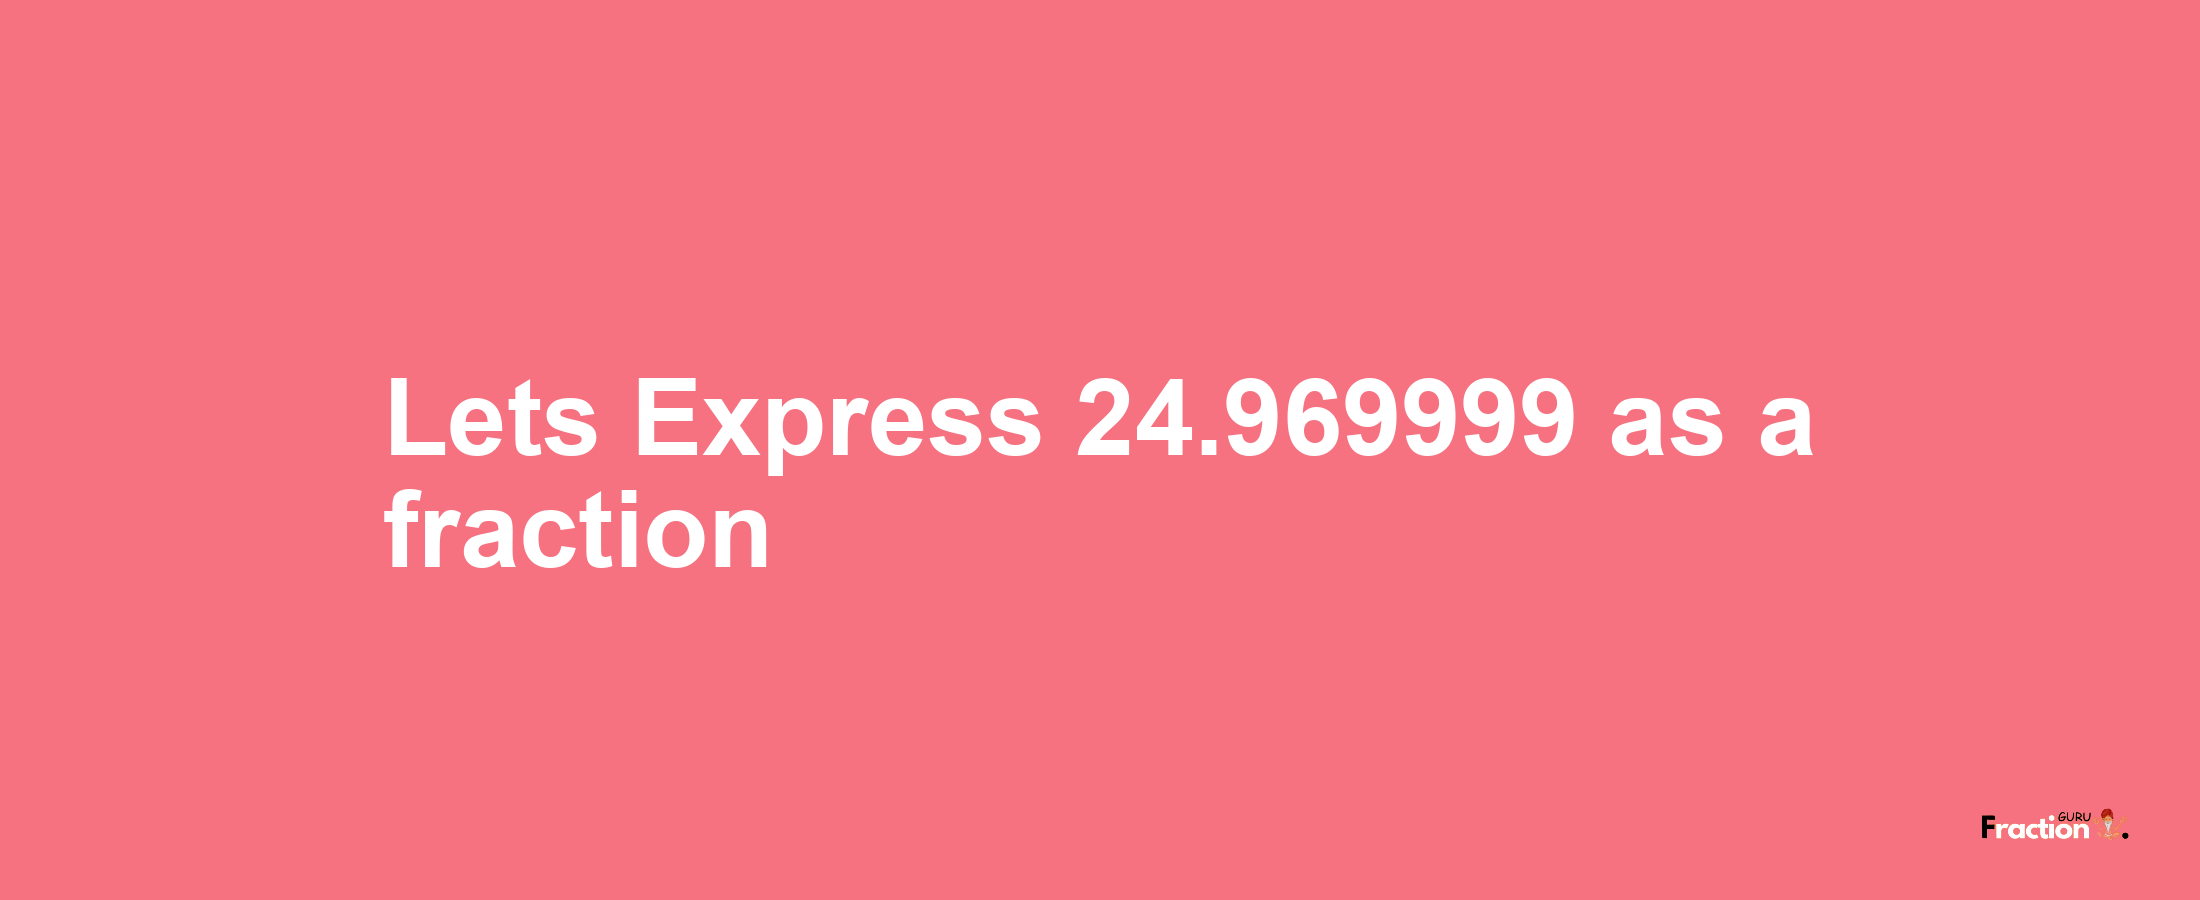 Lets Express 24.969999 as afraction